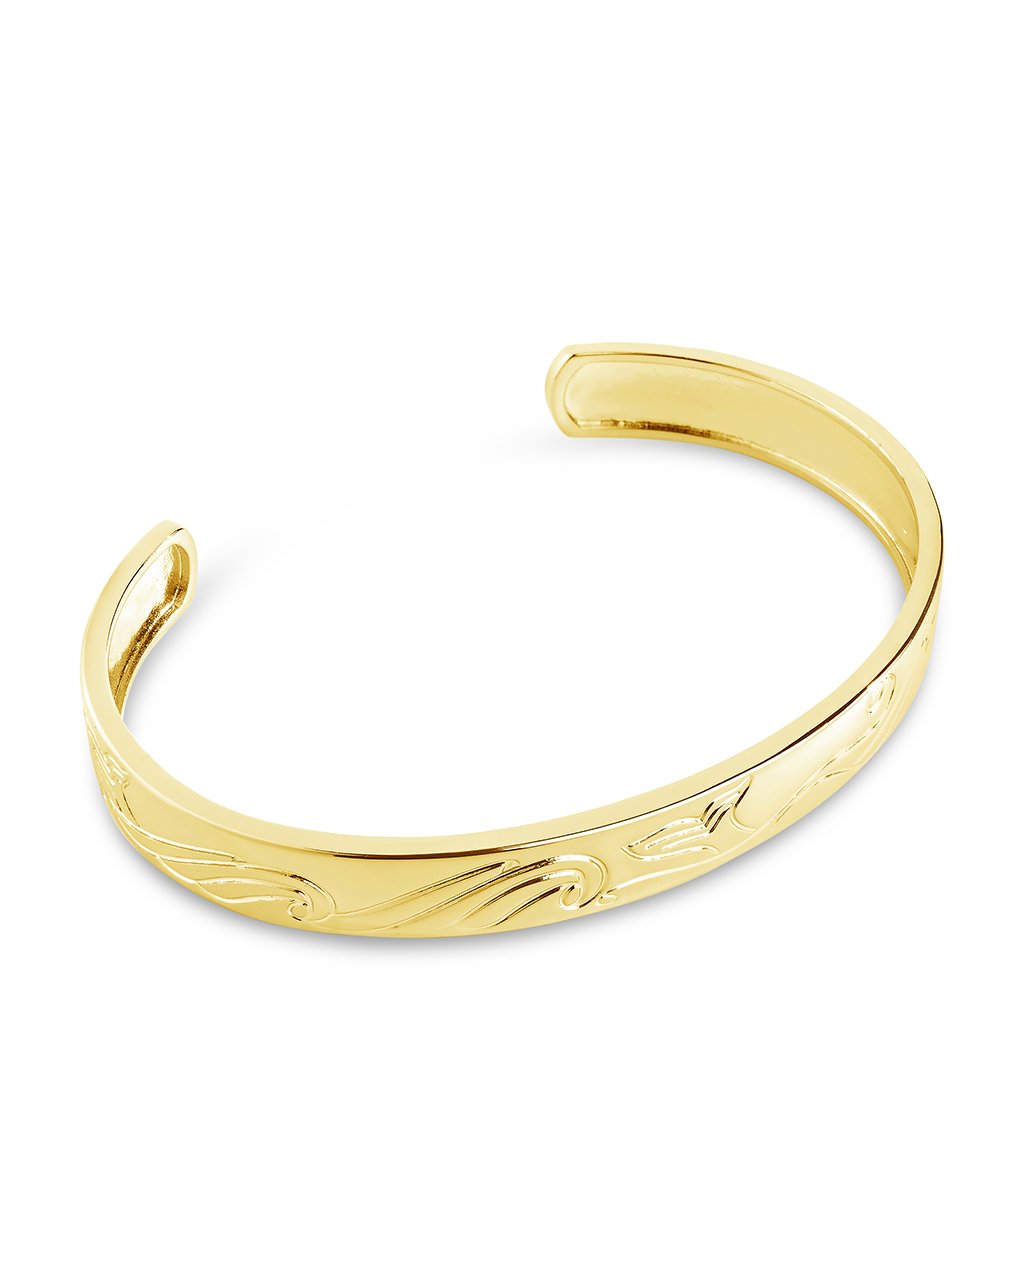 Swimming Siren Cuff - Sterling Forever